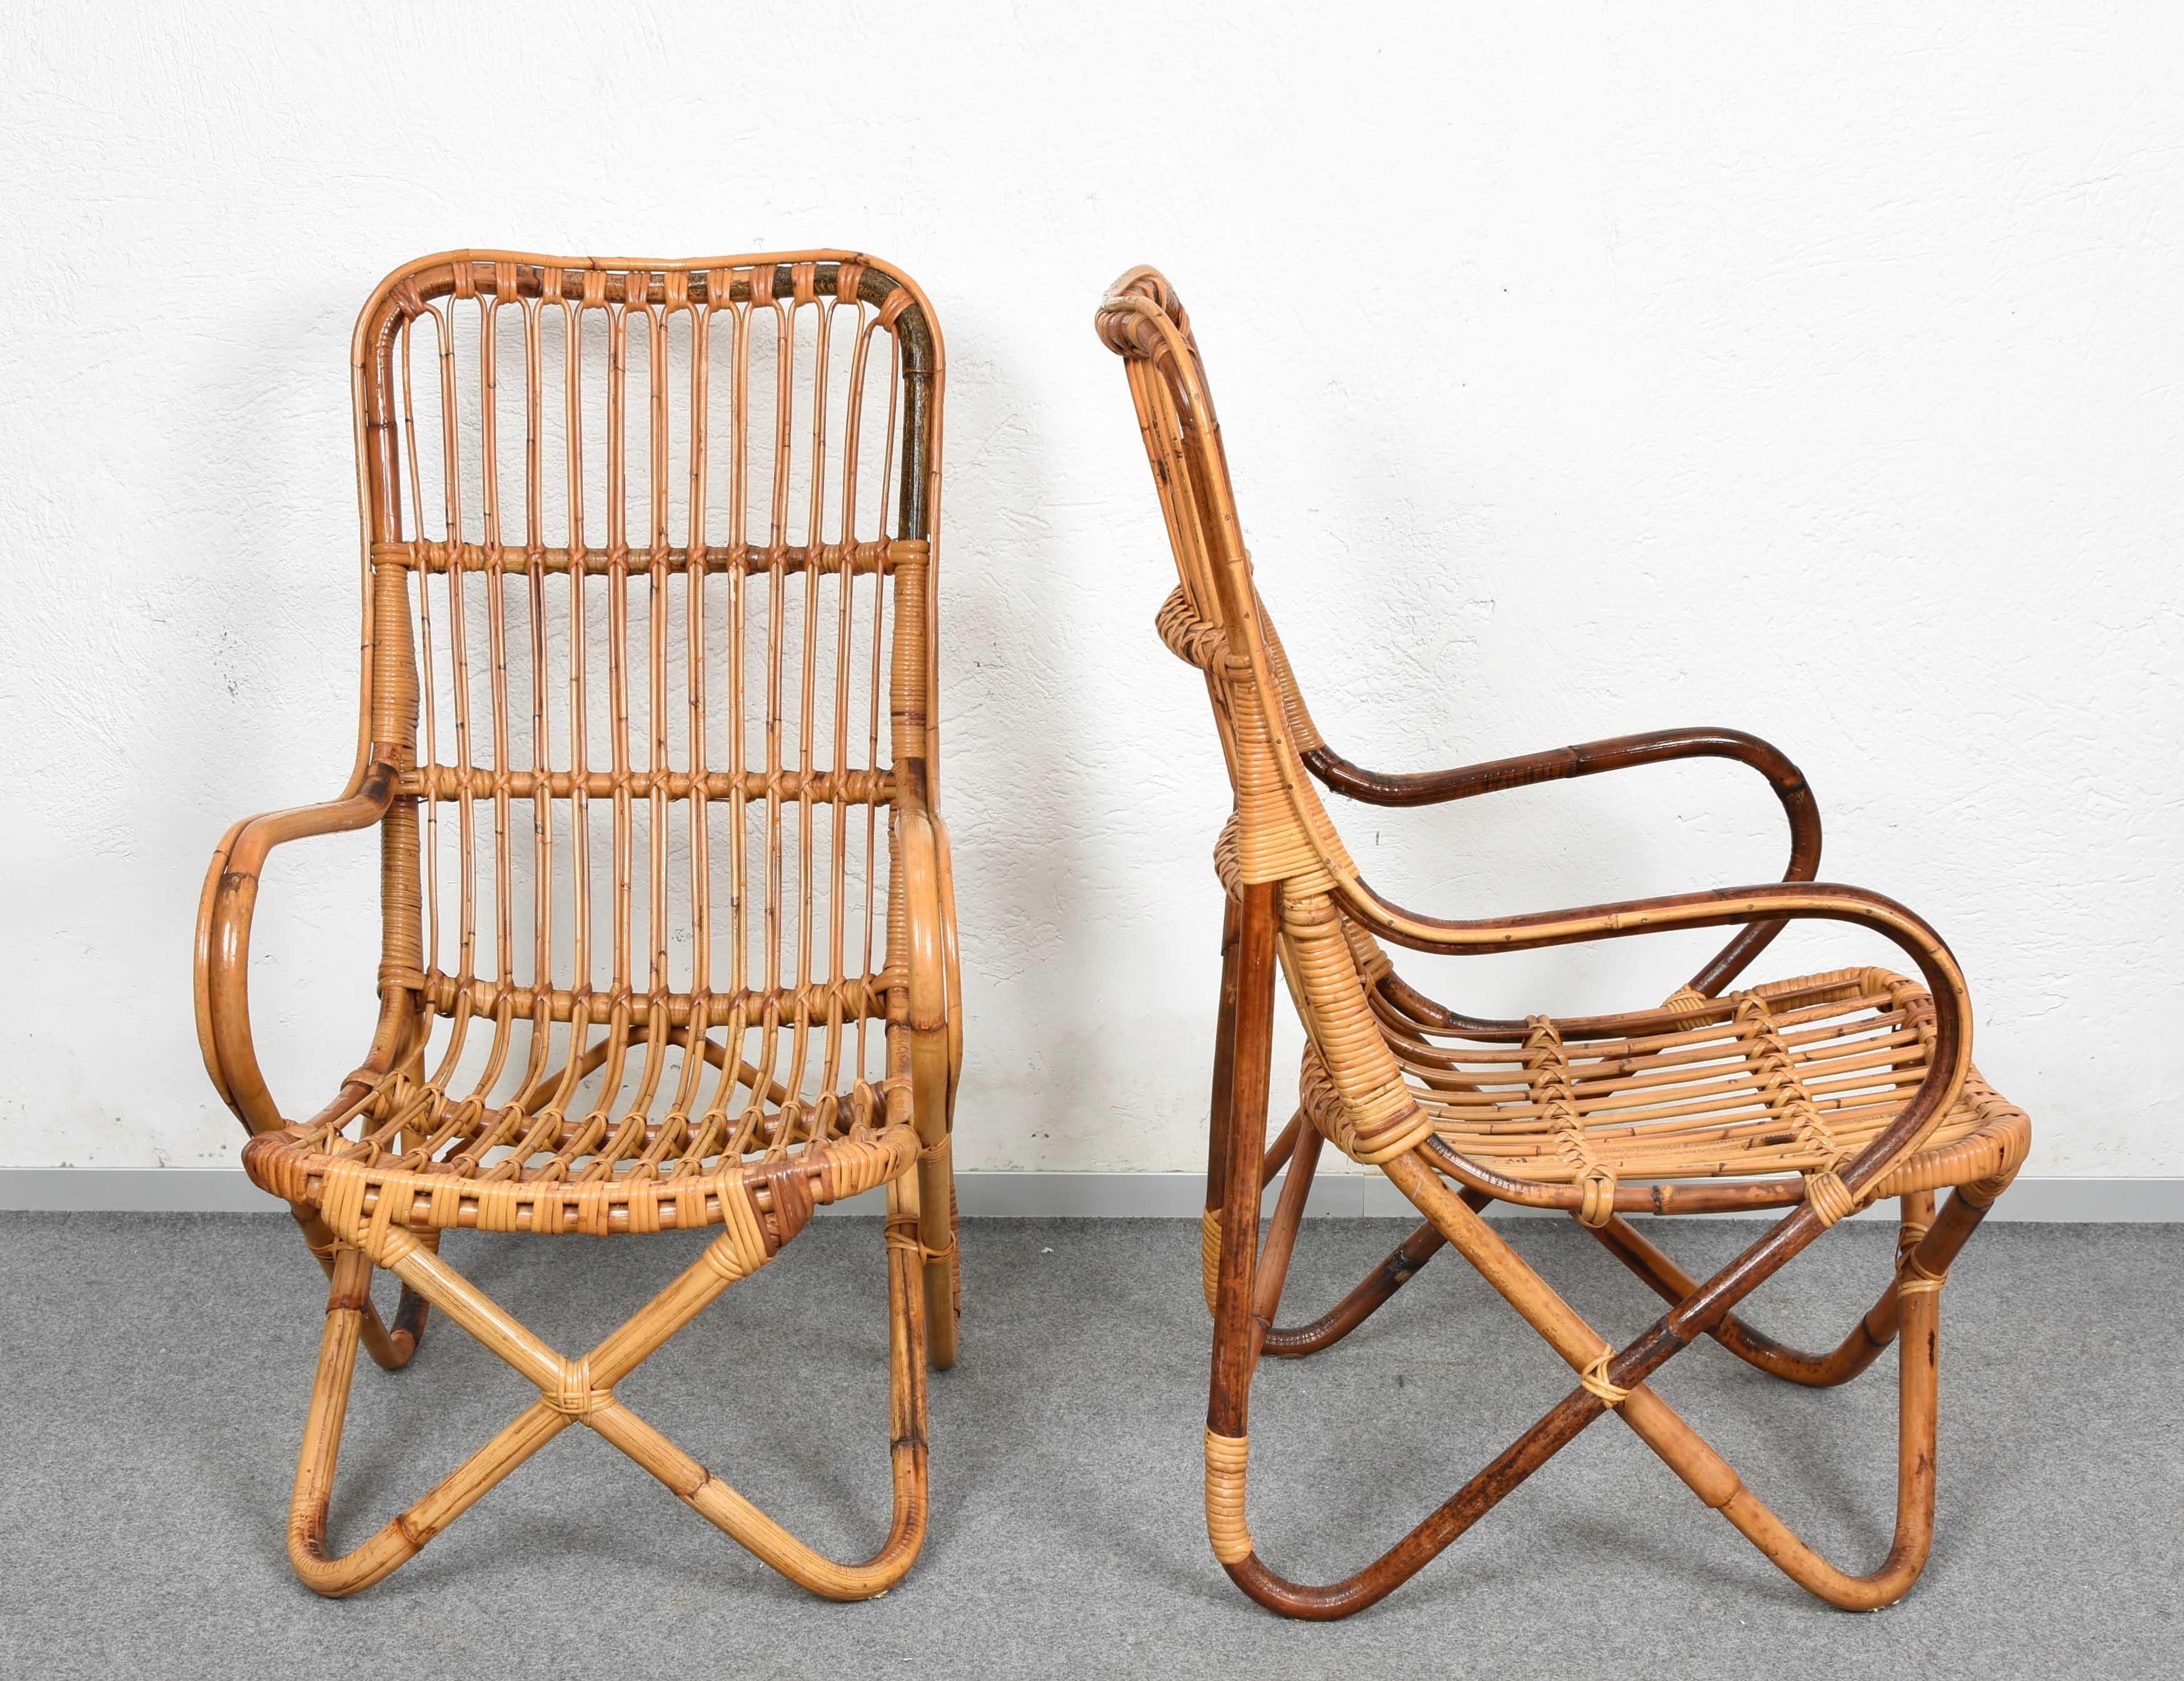 Incredible pair of Mid-Century Modern rattan and bamboo armchairs. This fantastic set was produced in Italy during the 1960s in the style of Tito Agnoli.

The seat is assembled with thin rattan elements while the structural elements are in bamboo,